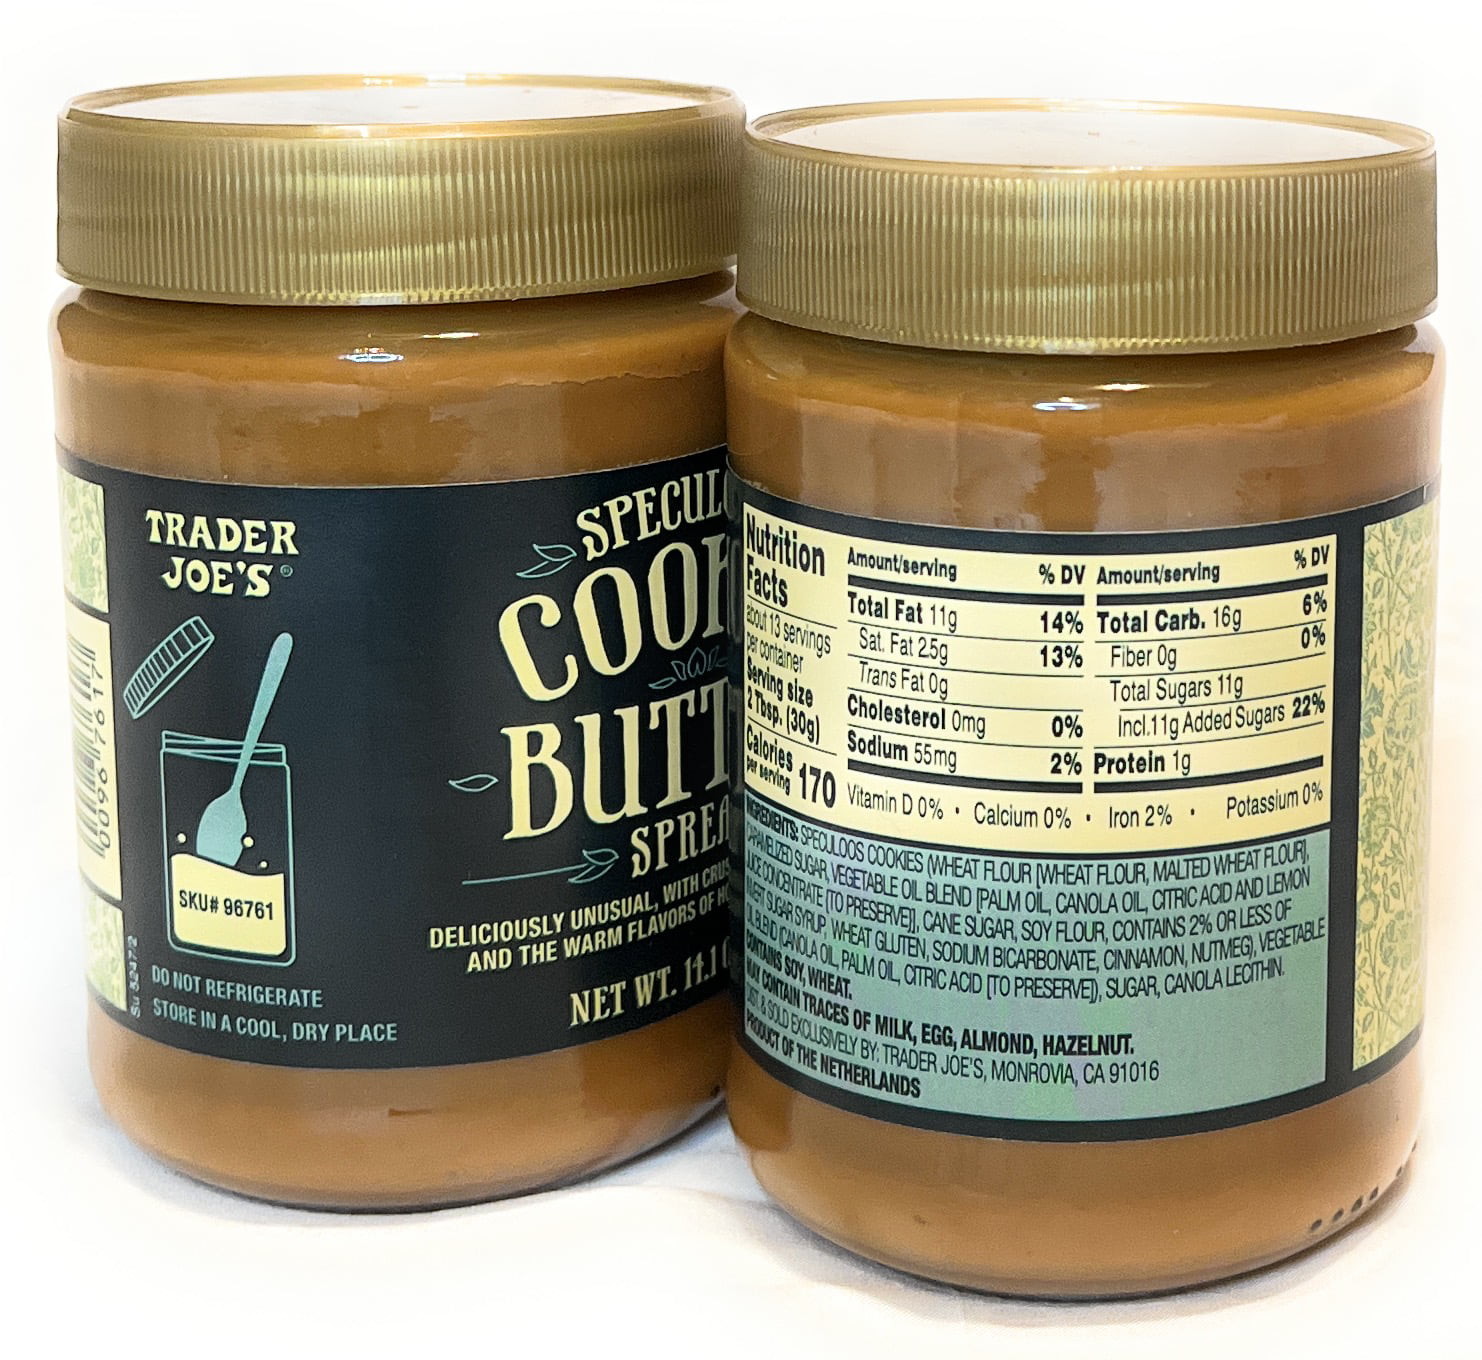 Speculoos Cookie Butter Archives - Salt and Serenity